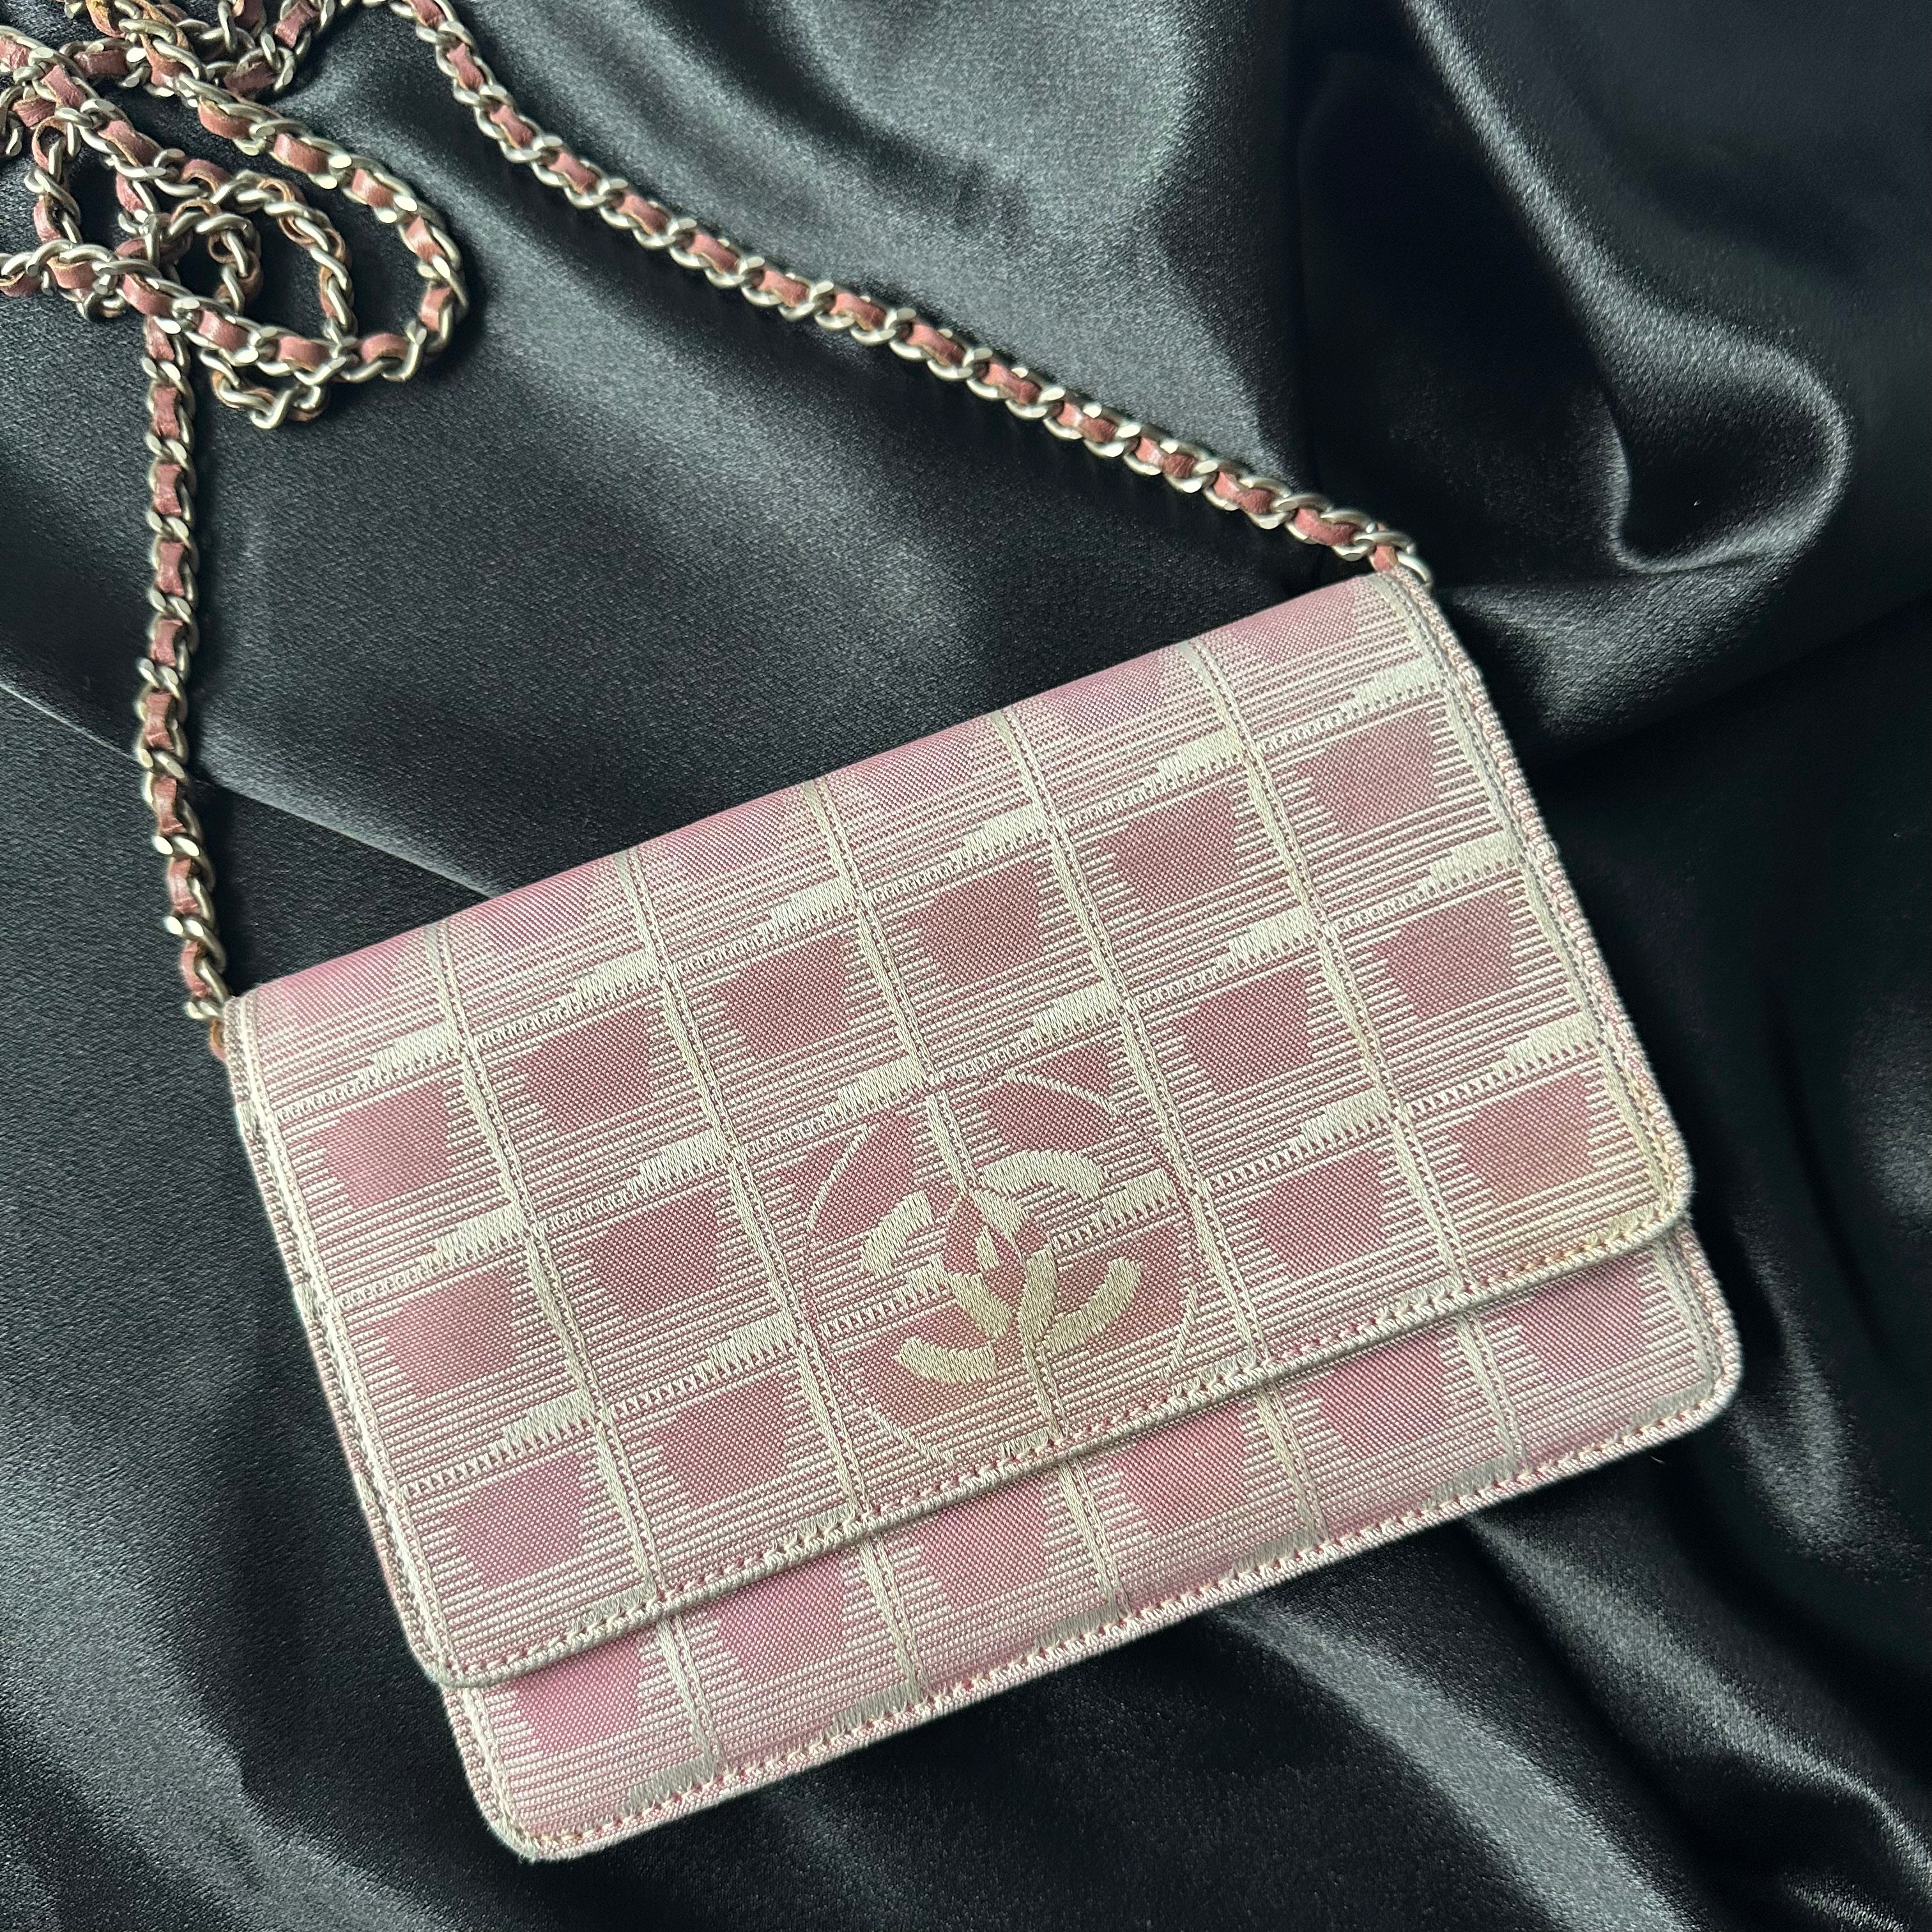 Cookies & Candies: What fits in a Chanel WOC?